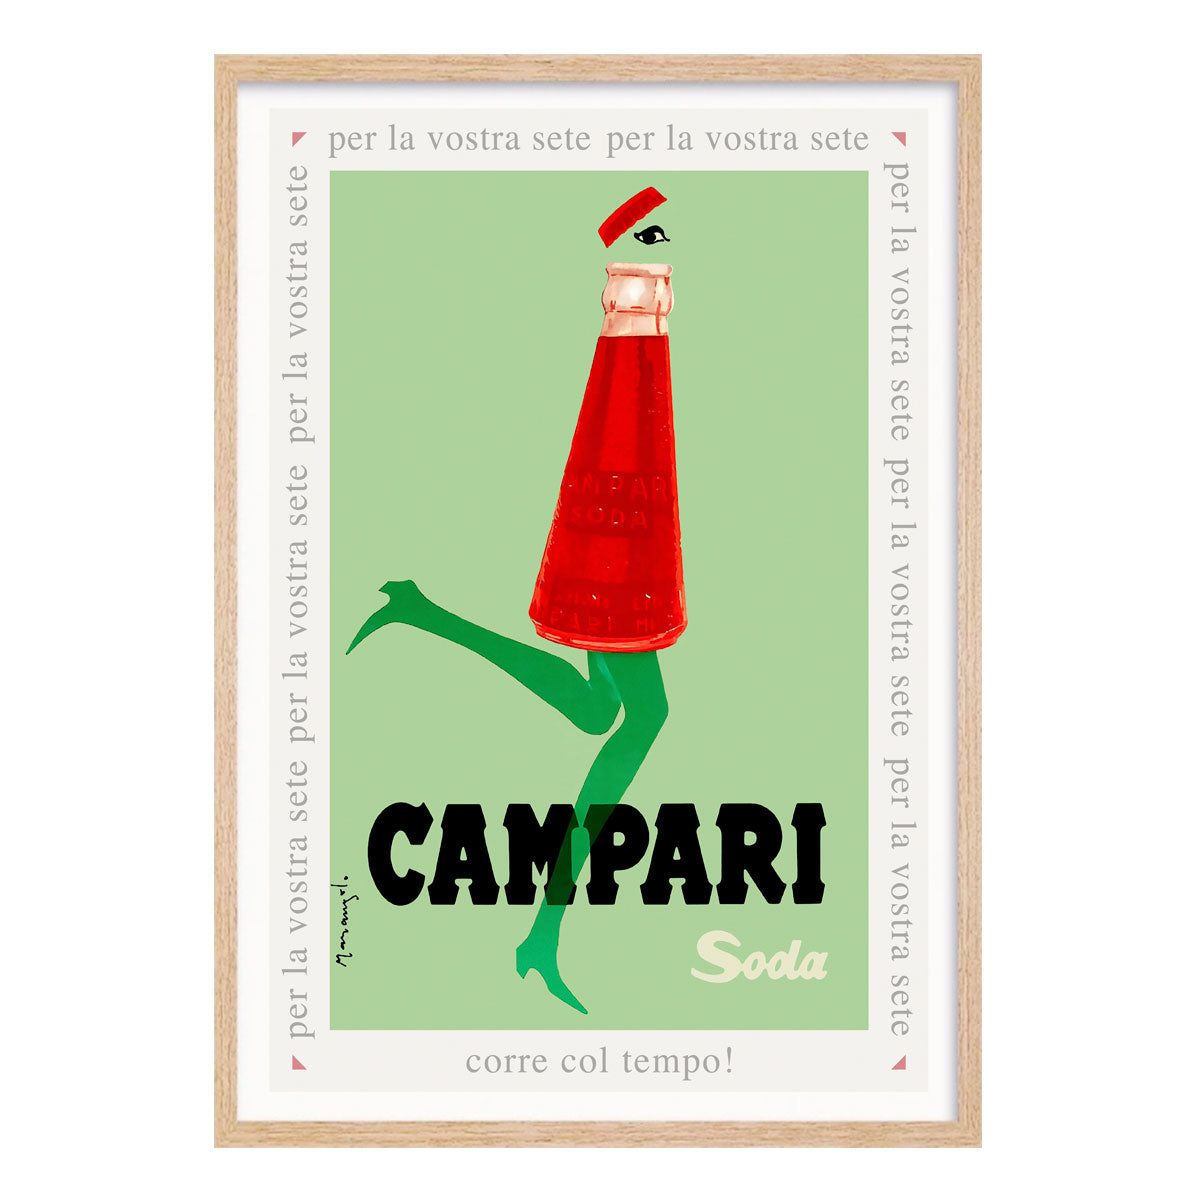 Campari Soda vintage retro advertising poster in oak frame from Places We Luv